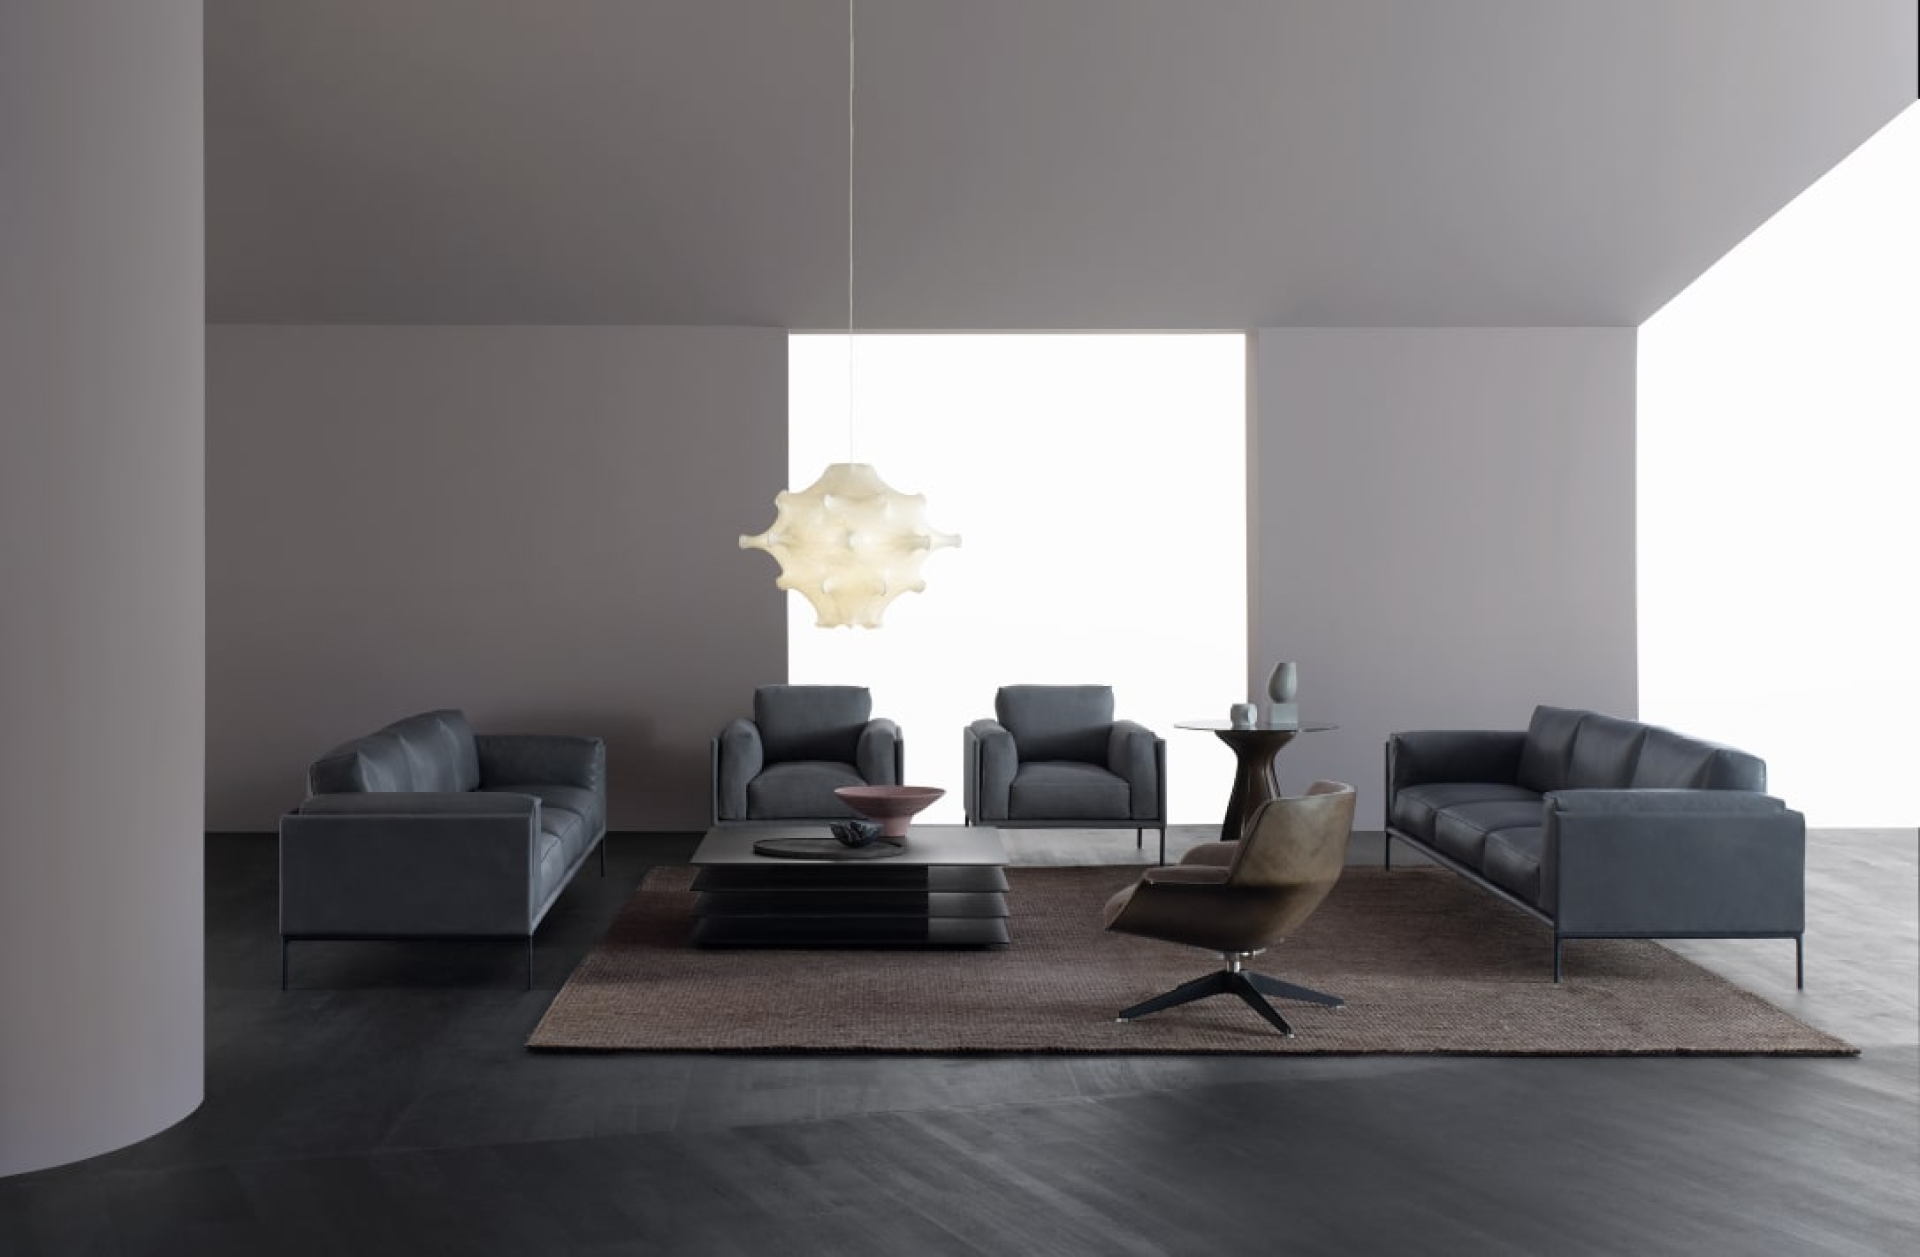 Living room furniture including two dark grey sofas